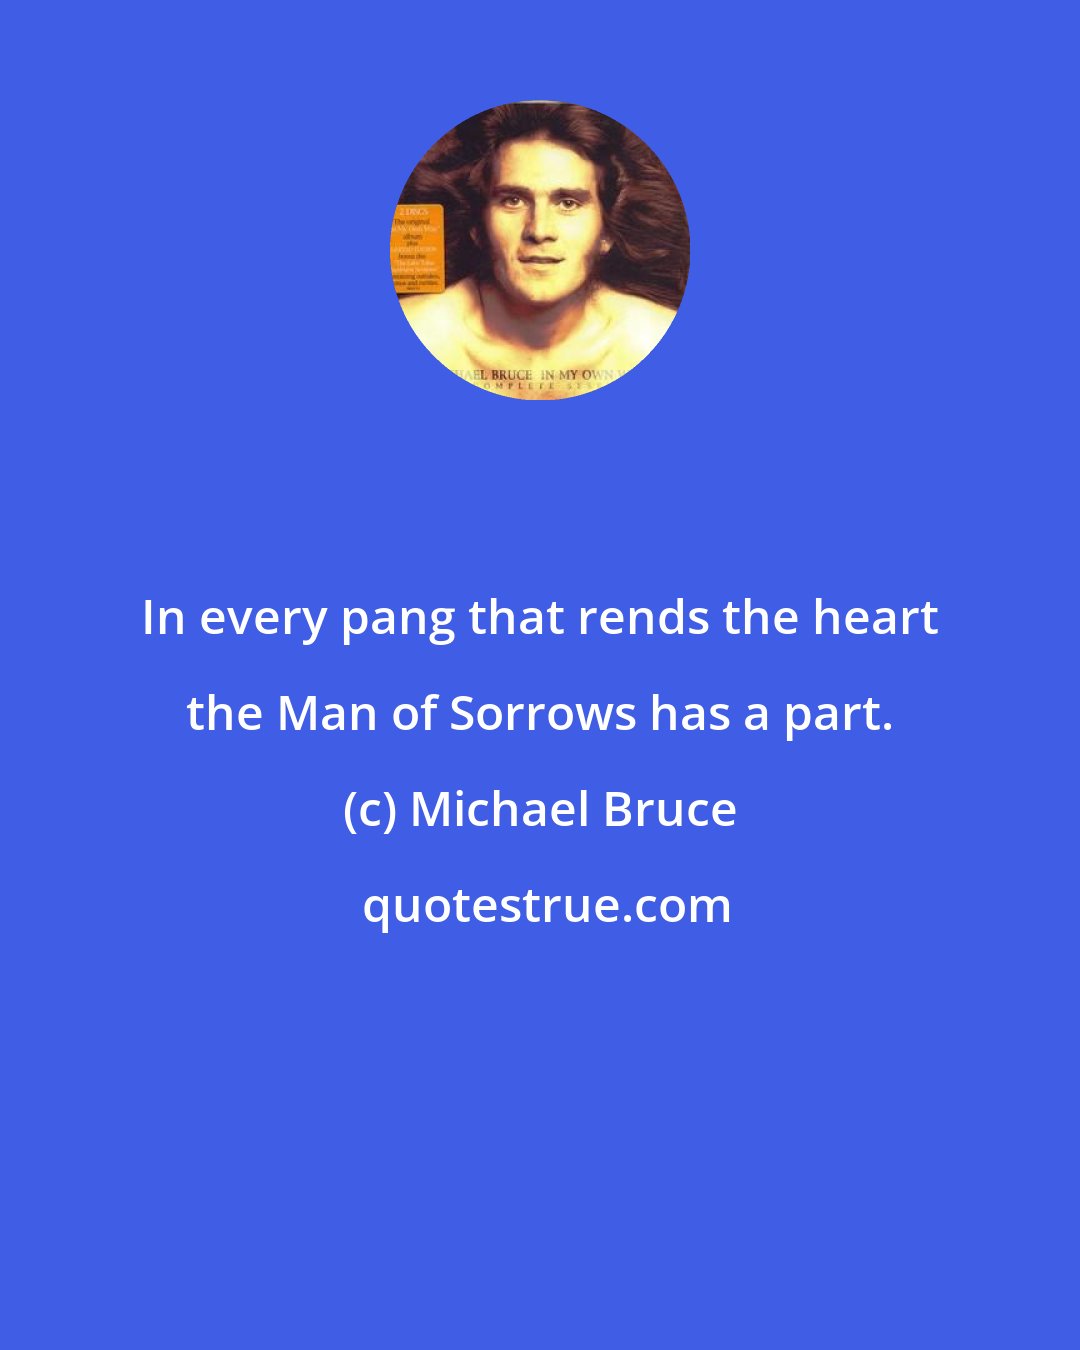 Michael Bruce: In every pang that rends the heart the Man of Sorrows has a part.